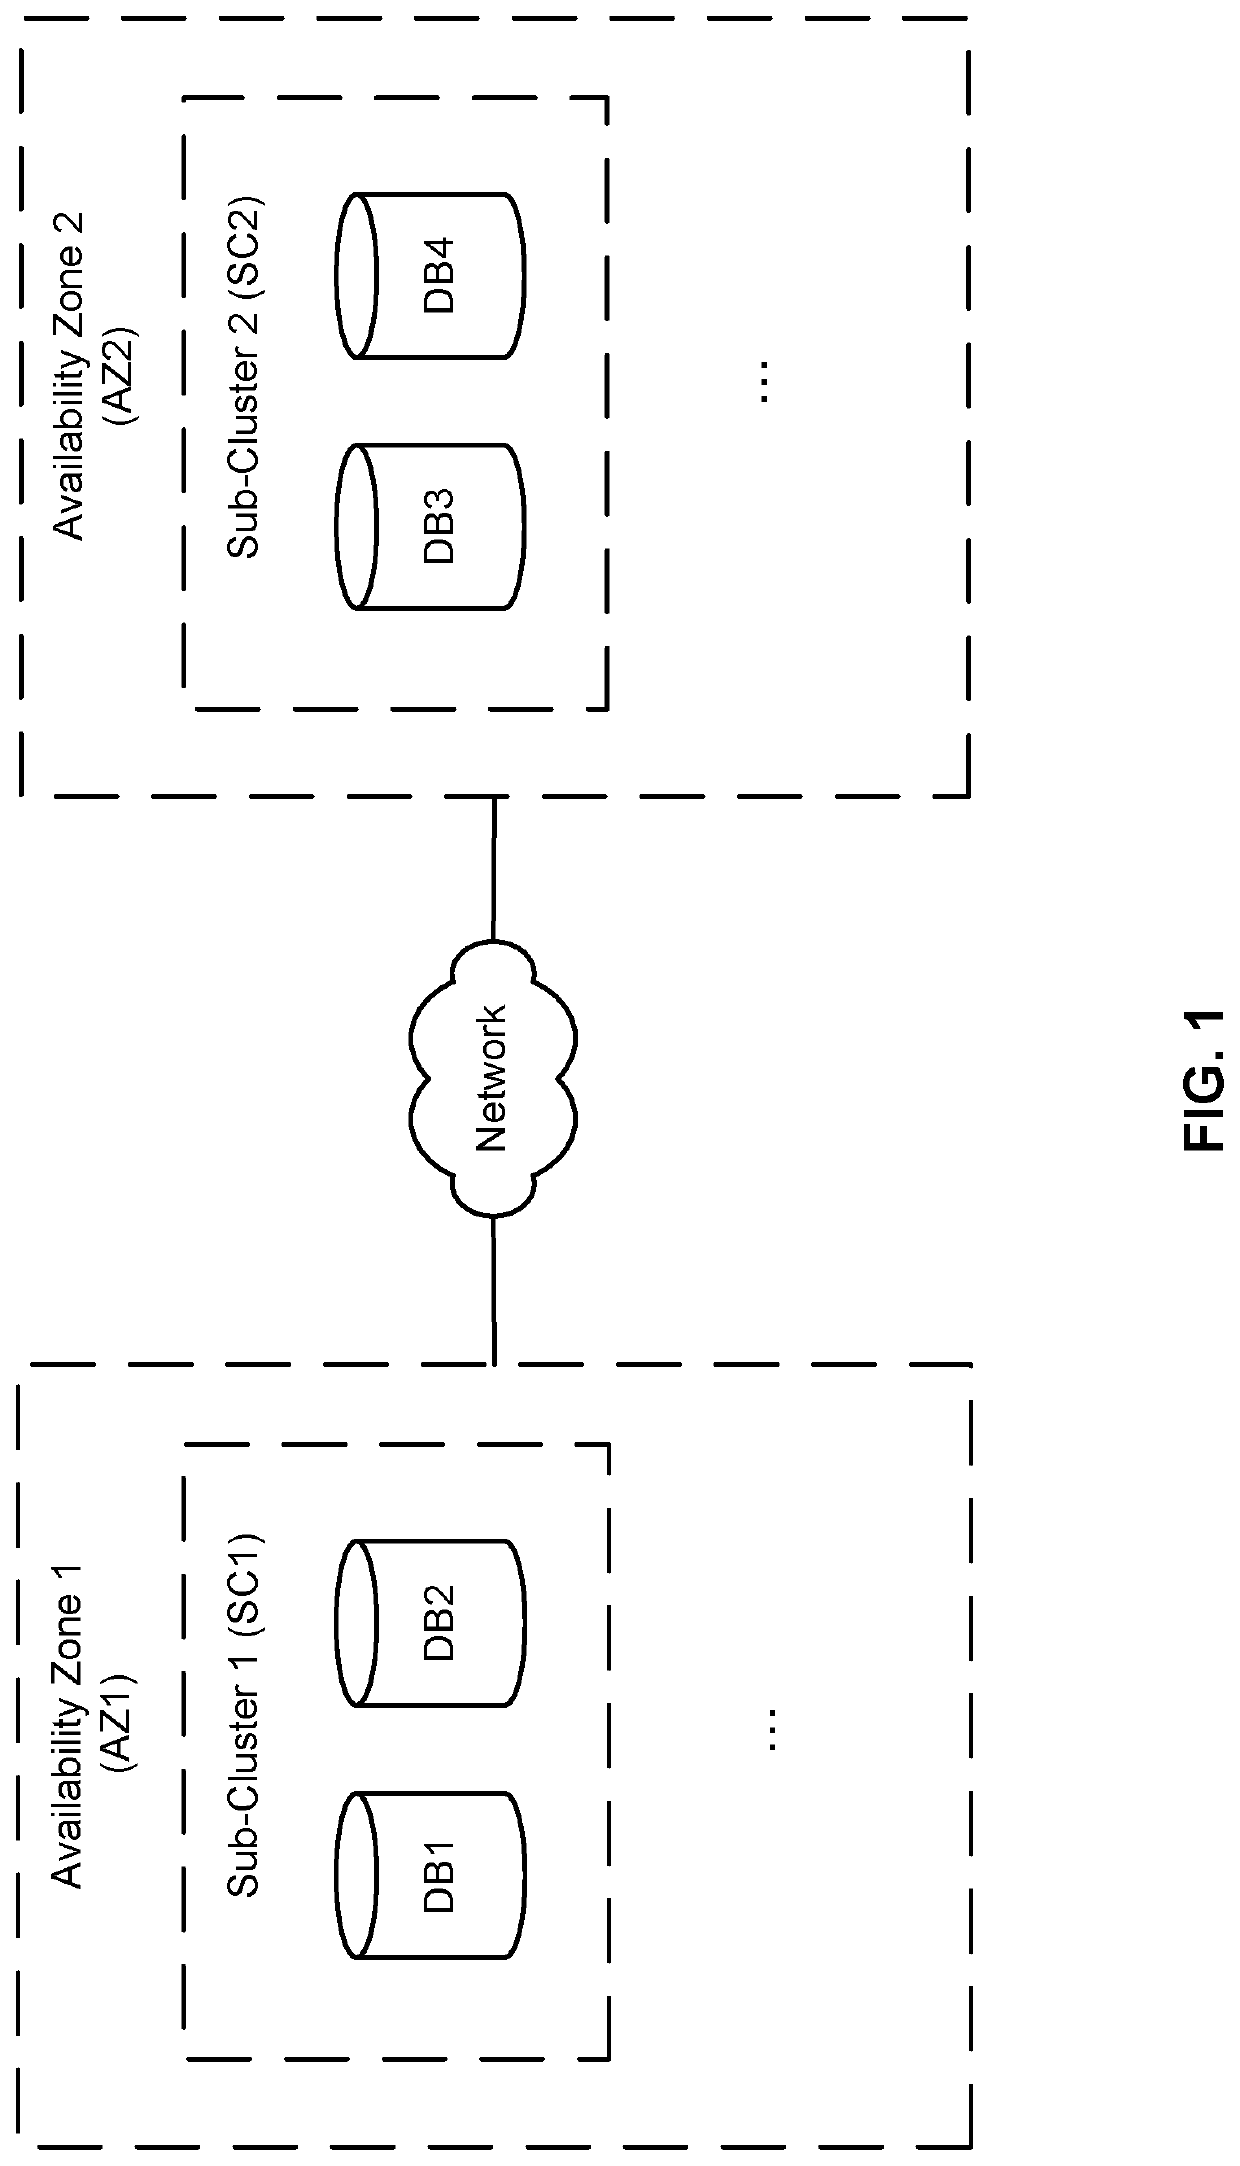 Transaction processing for a database distributed across availability zones